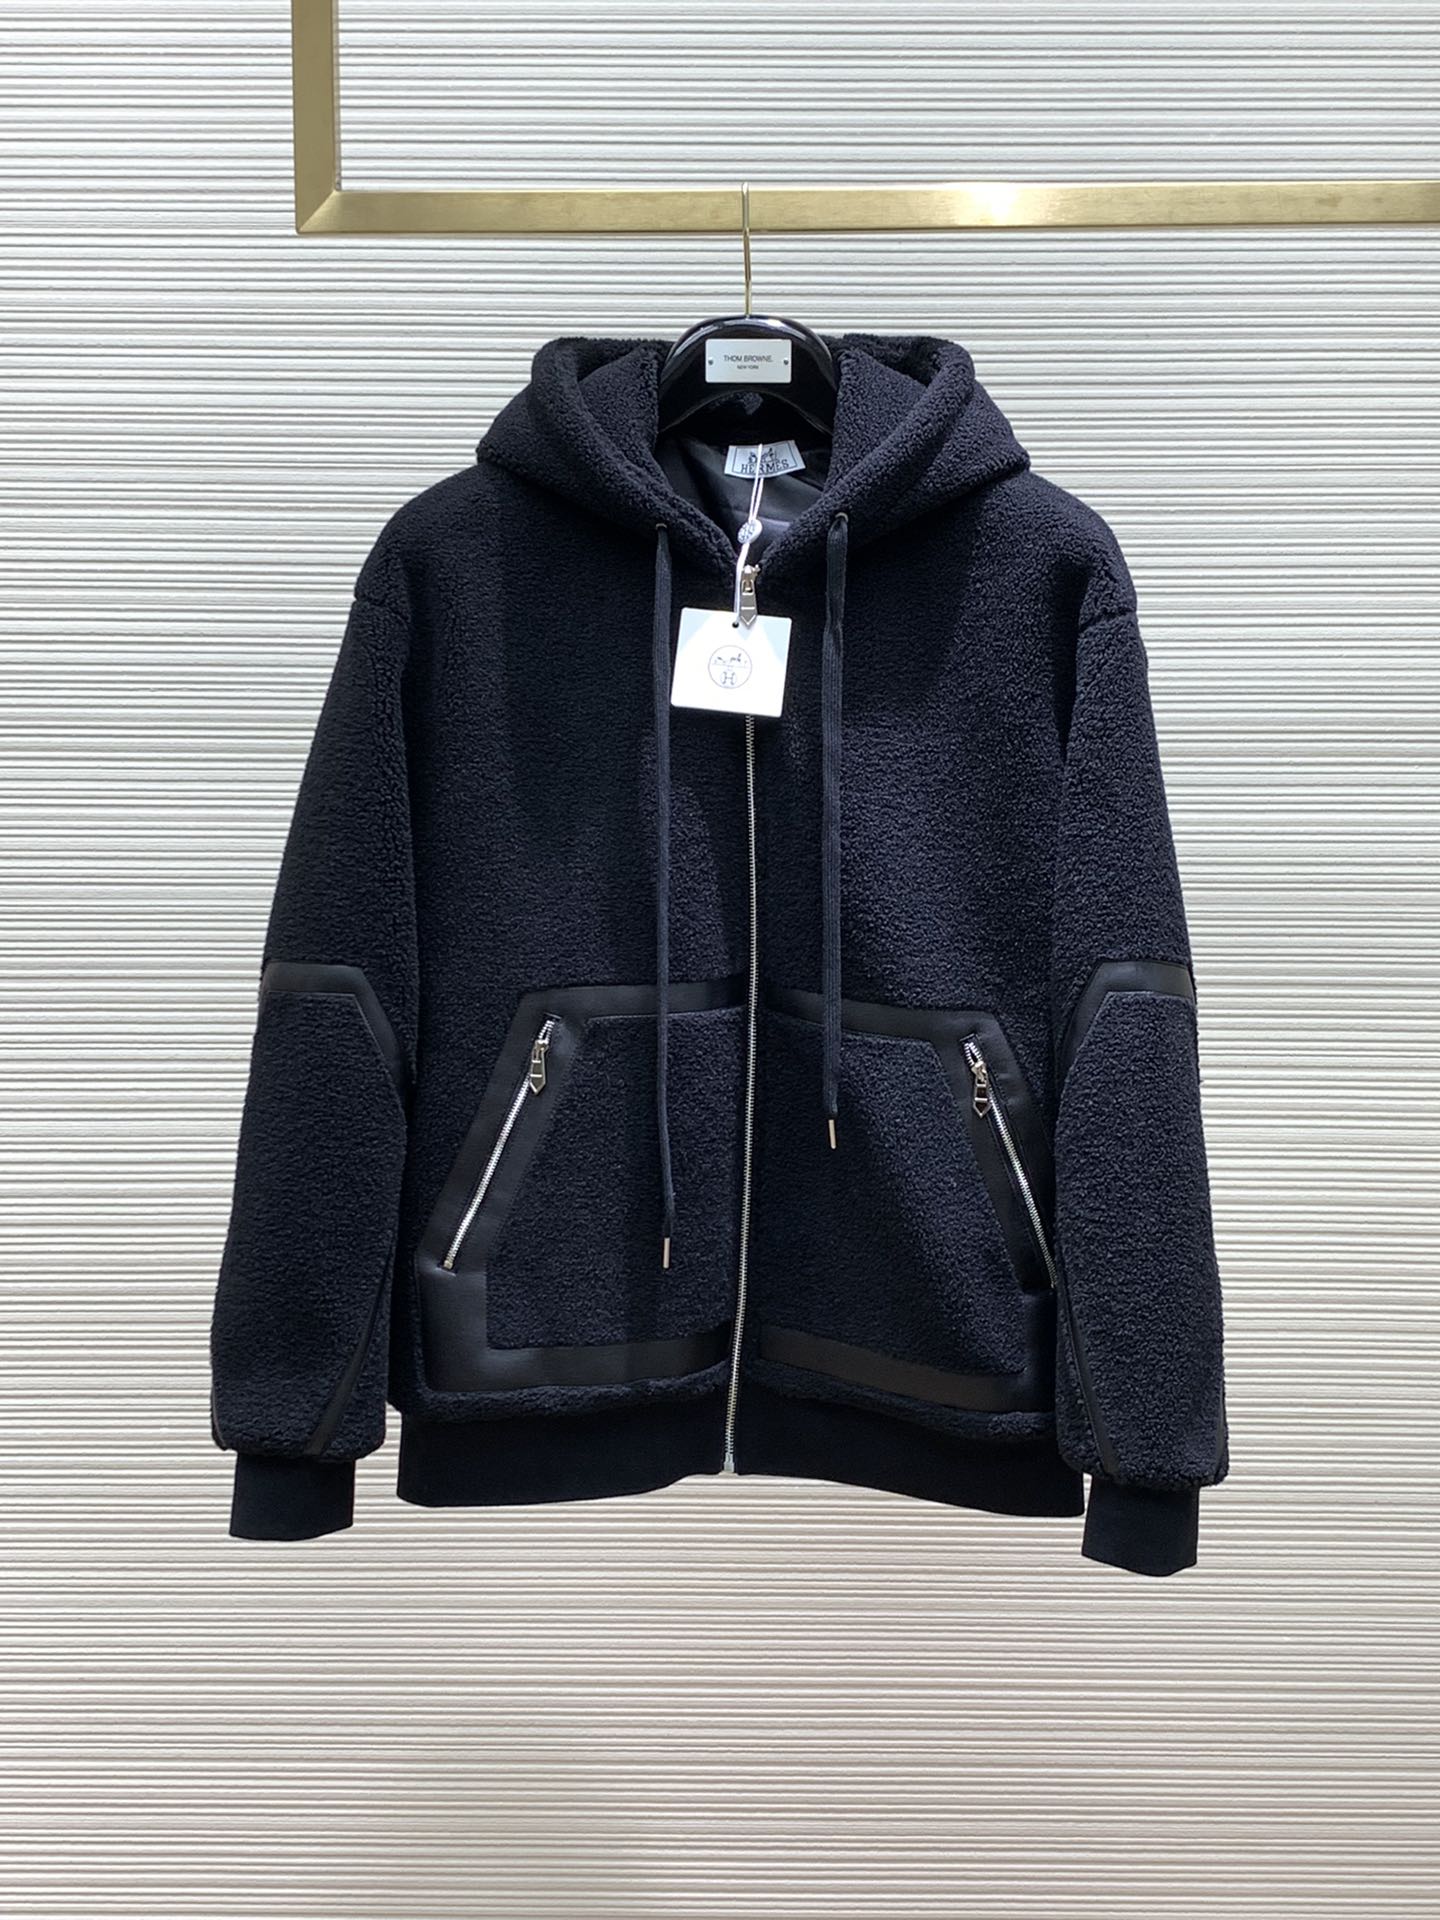 Hermes Clothing Coats & Jackets Printing Winter Collection Fashion Hooded Top